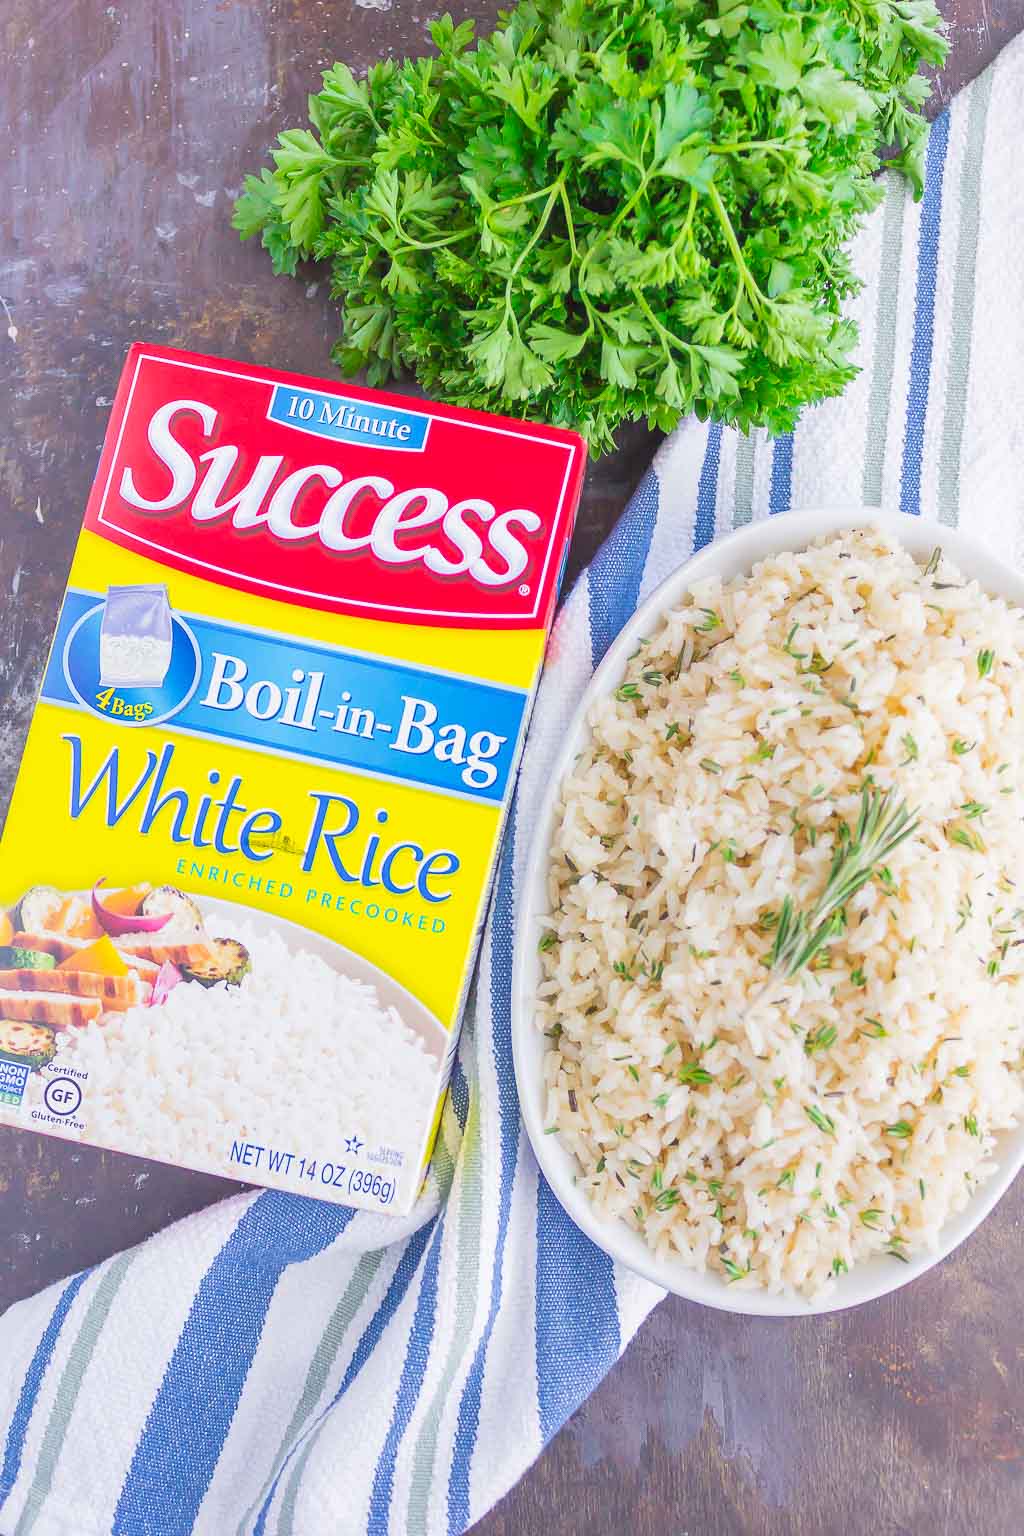 Garlic Herb Rice is a simple side dish that's ready in just 20 minutes. A mixture of fresh herbs, garlic and butter make this easy dish loaded with flavor and perfect to accompany any meal! #rice #garlic #garlicrice #butter #butterrice #sidedish #recipe